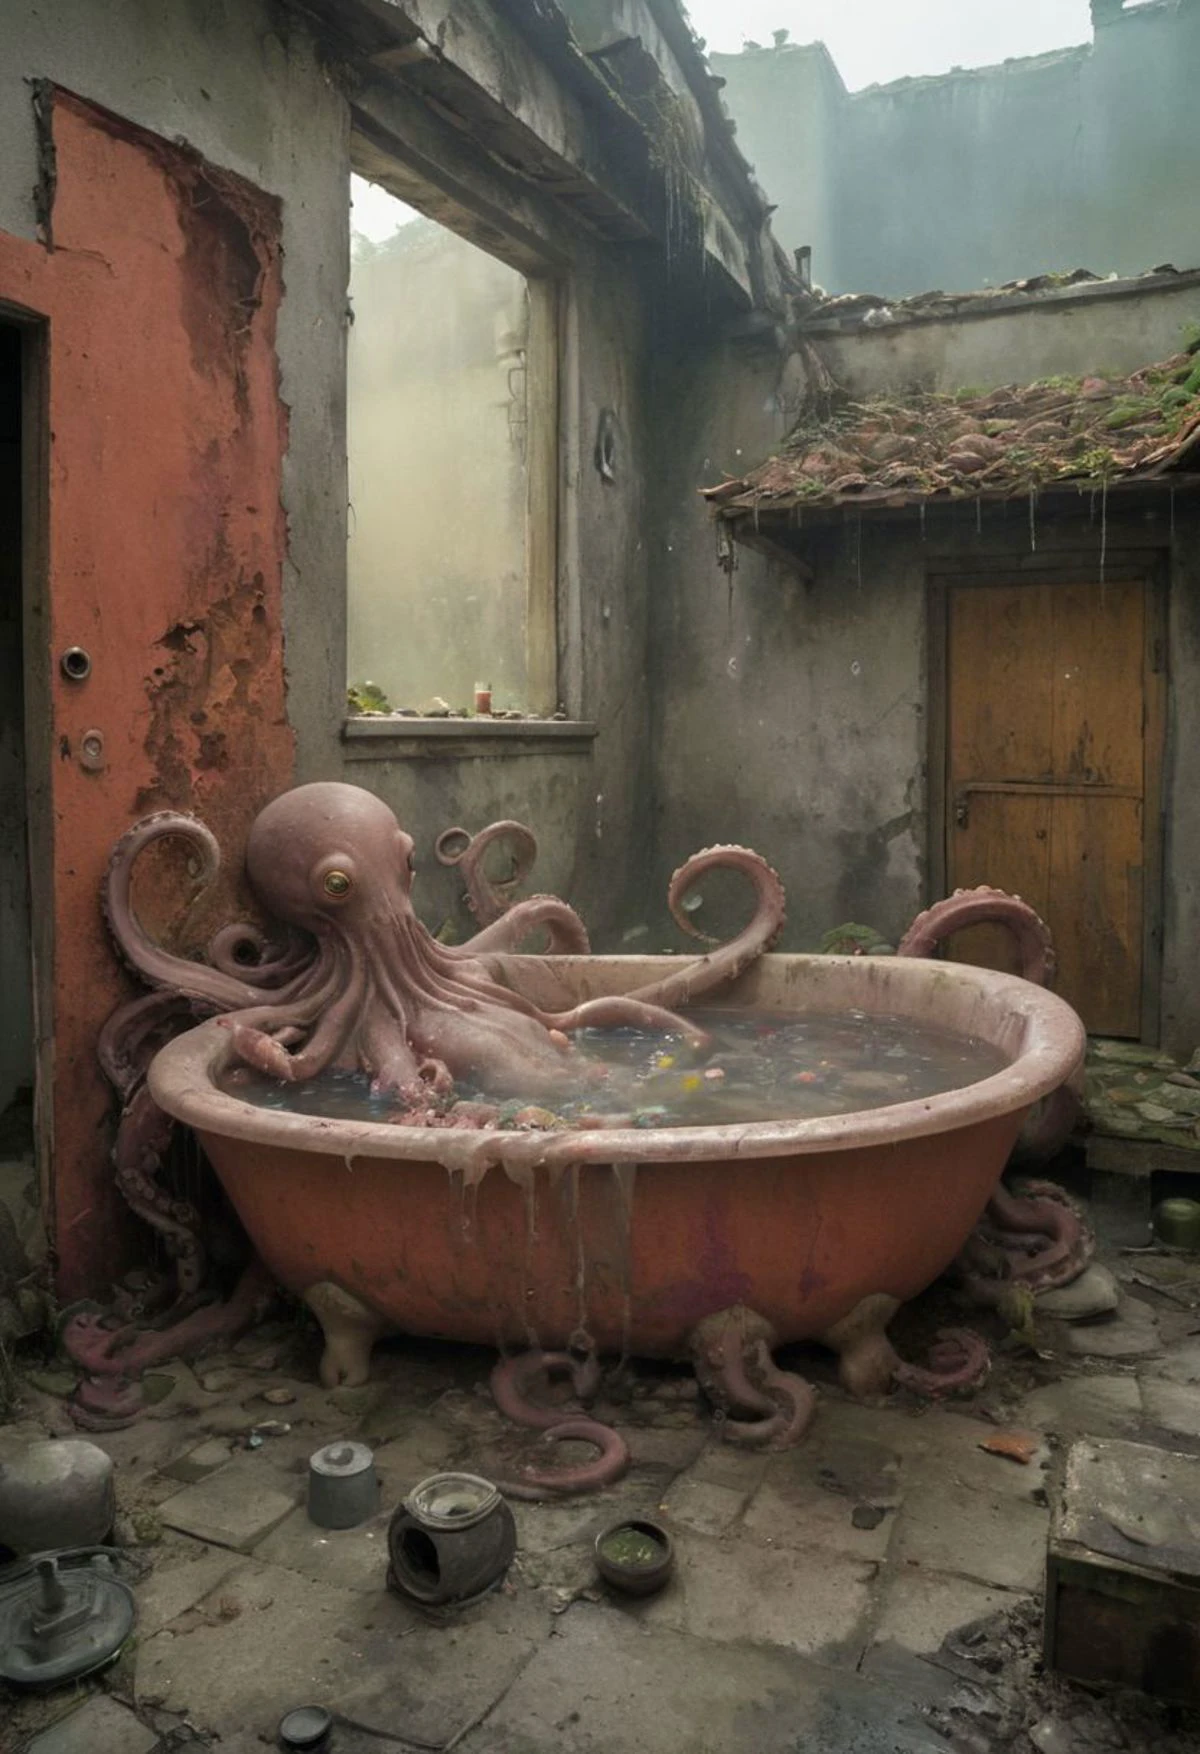 By herg, vibrant colors, Create a captivating story inspired by this image: an octopus woman lounging in a bathtub nestled within a dilapidated house, its walls half-standing, her tentacles leisurely draping over the edge as bubbles froth around her., mystic, ethereal, darkness, atmospheric haze,